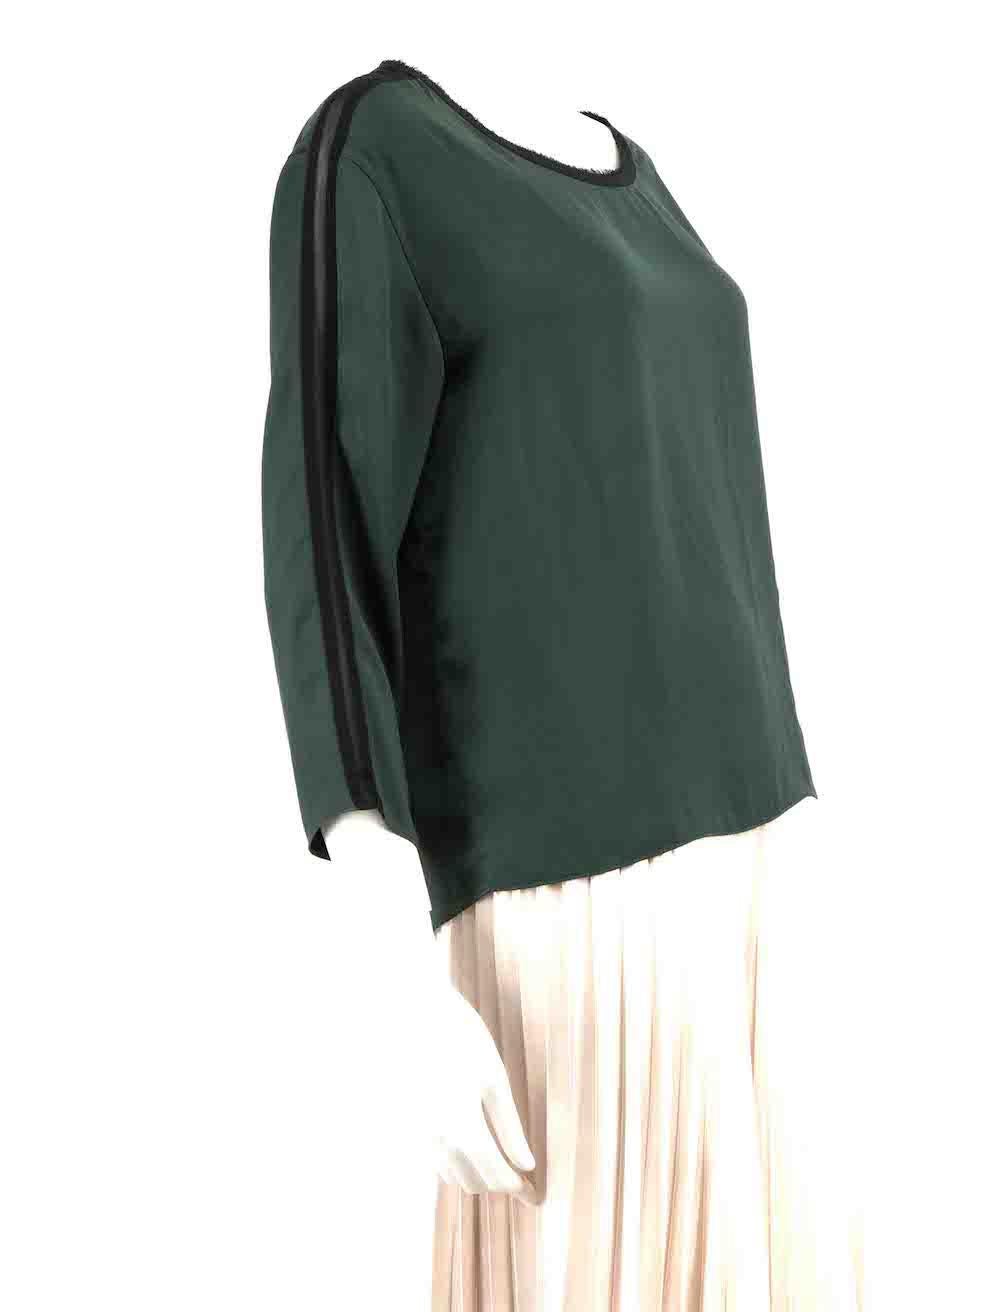 CONDITION is Good. Minor wear to top is evident. Light wear to the front with plucks to the weave on this used Rag & Bone designer resale item.
 
 Details
 Green
 Polyester
 Blouse
 Black raw edge trim
 Long sleeves
 Round neck
 
 
 Made in USA
 
